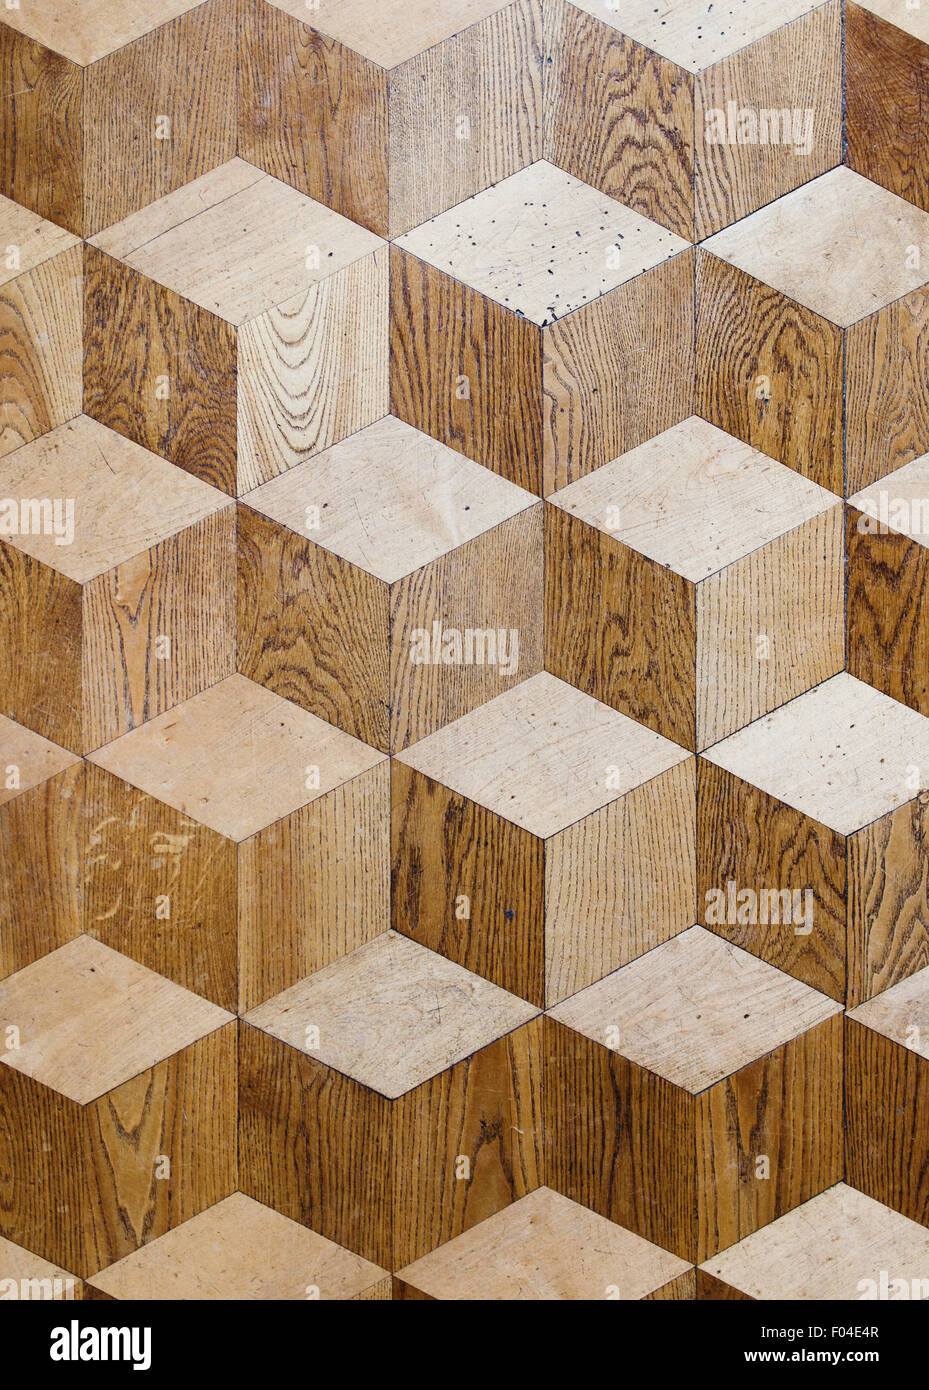 Old palace wooden parquet flooring design with volume cubes illusion Stock Photo